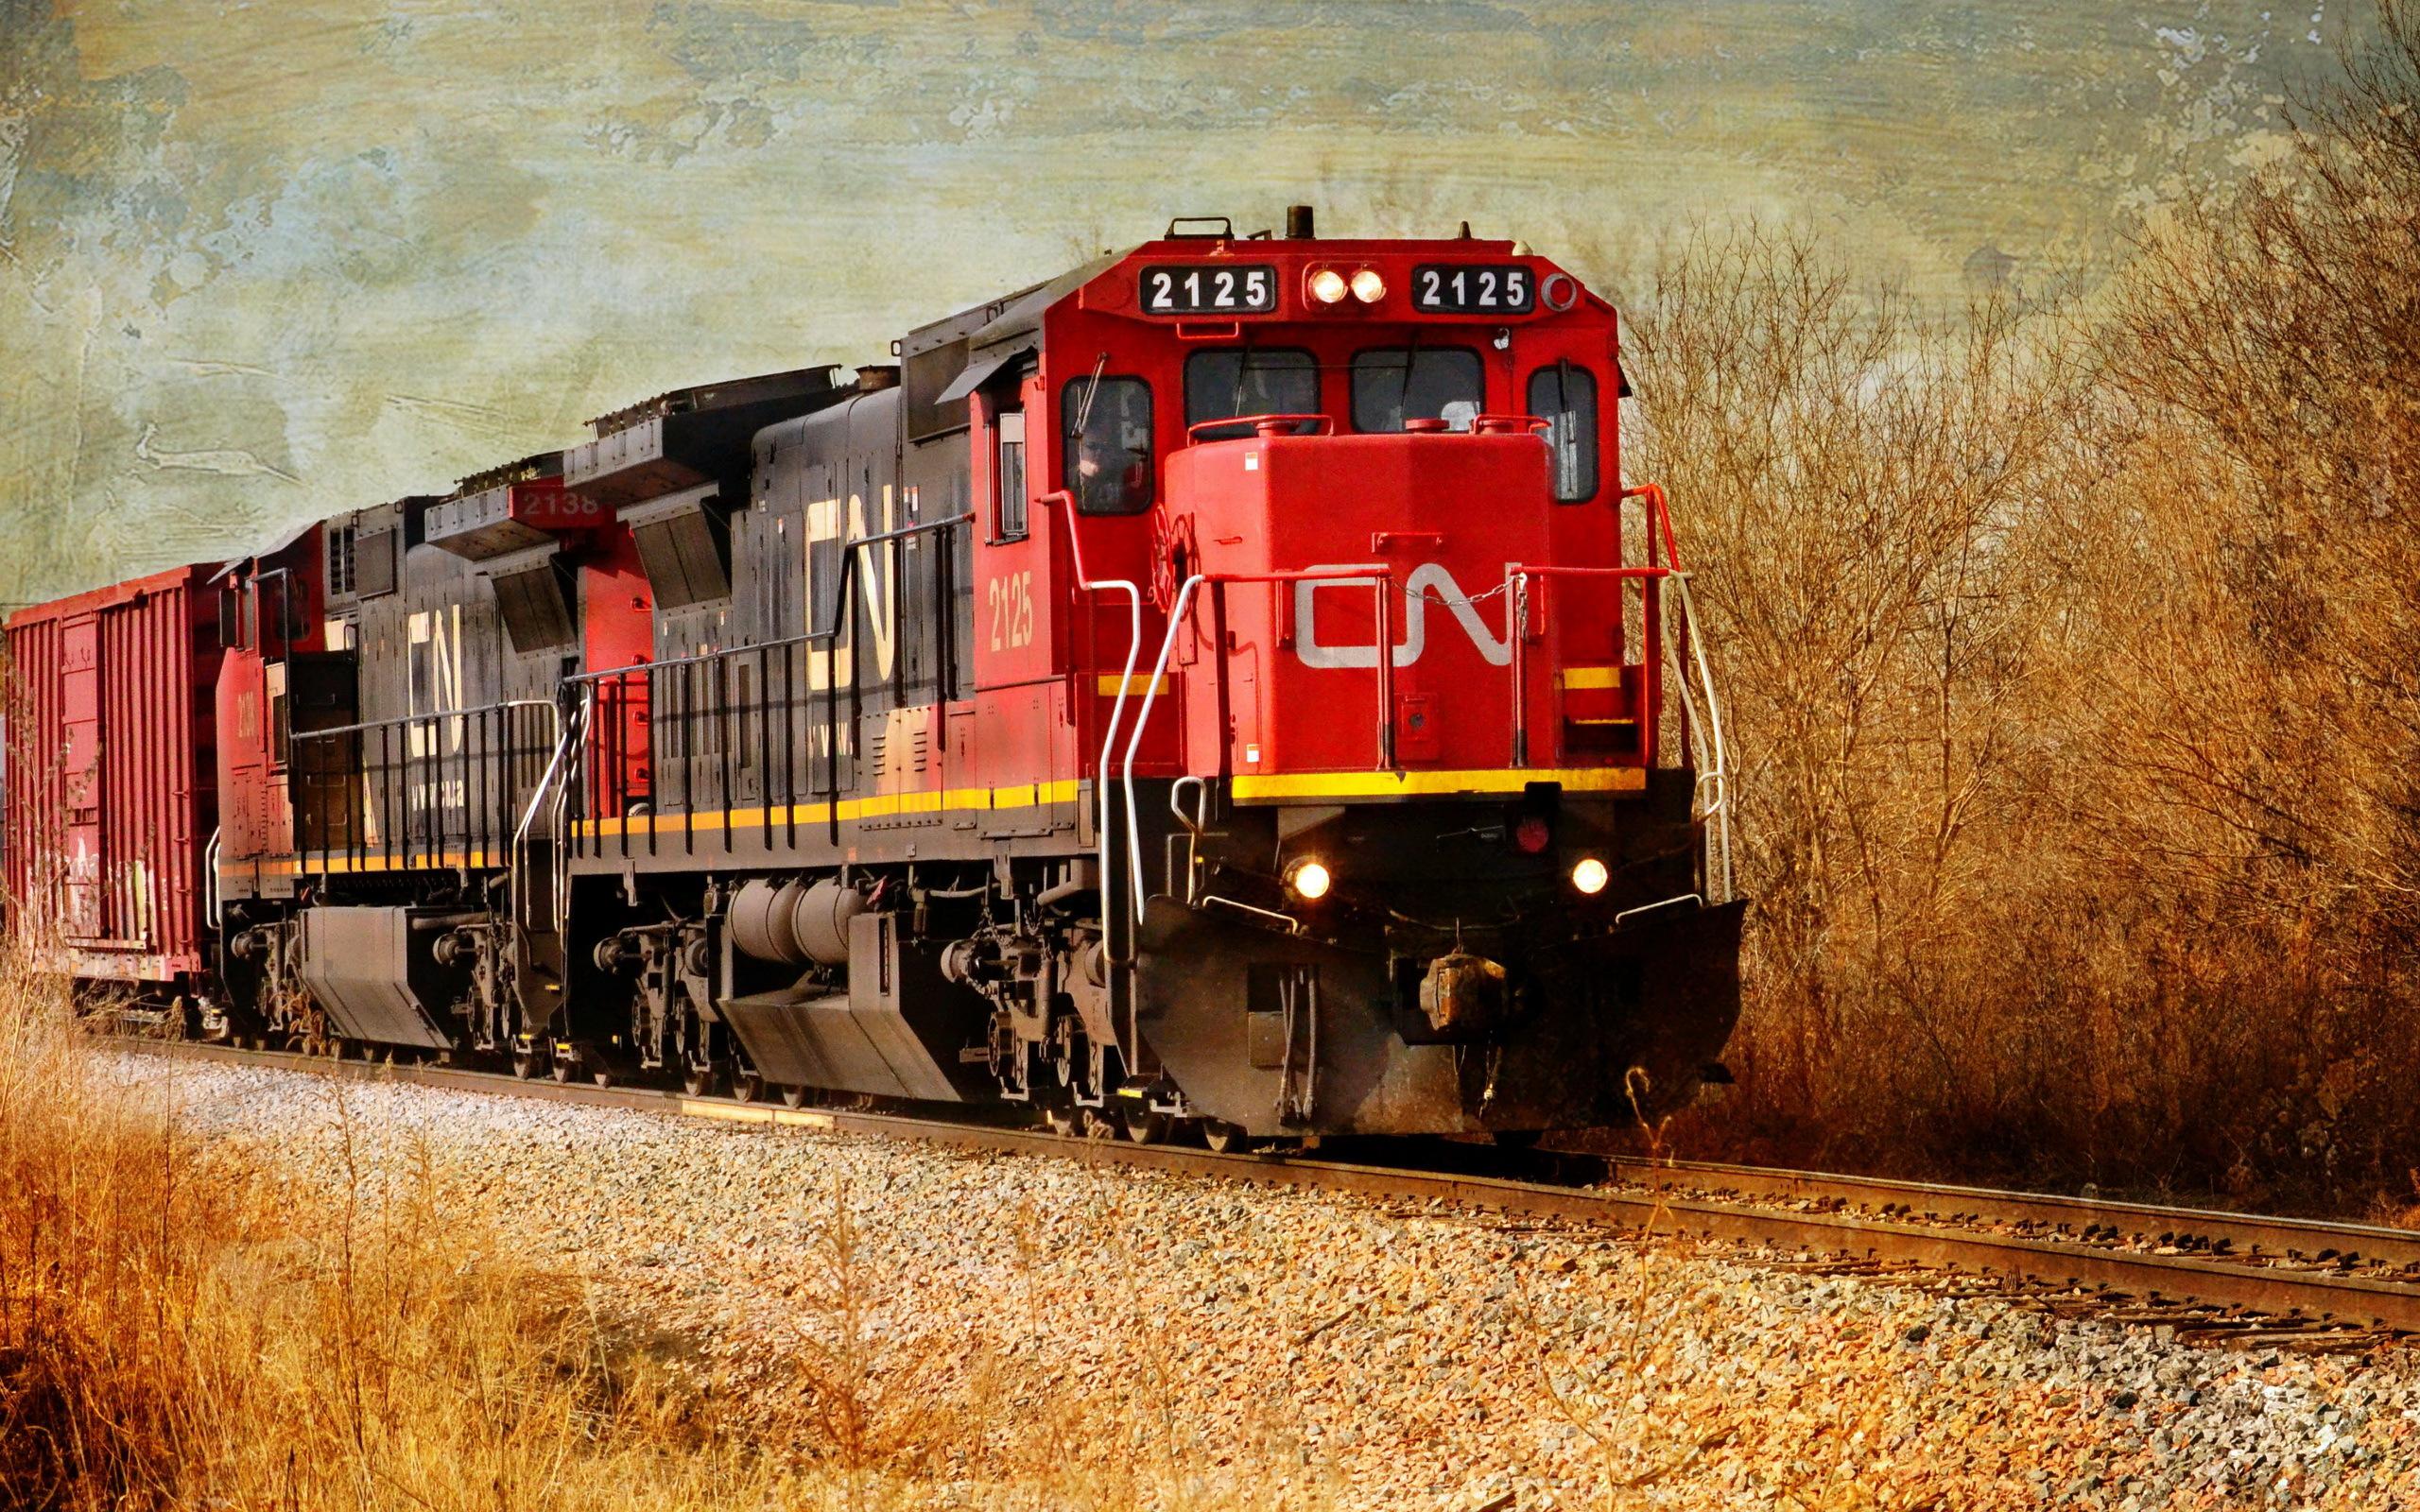  Train  Wallpapers  High Quality Download Free